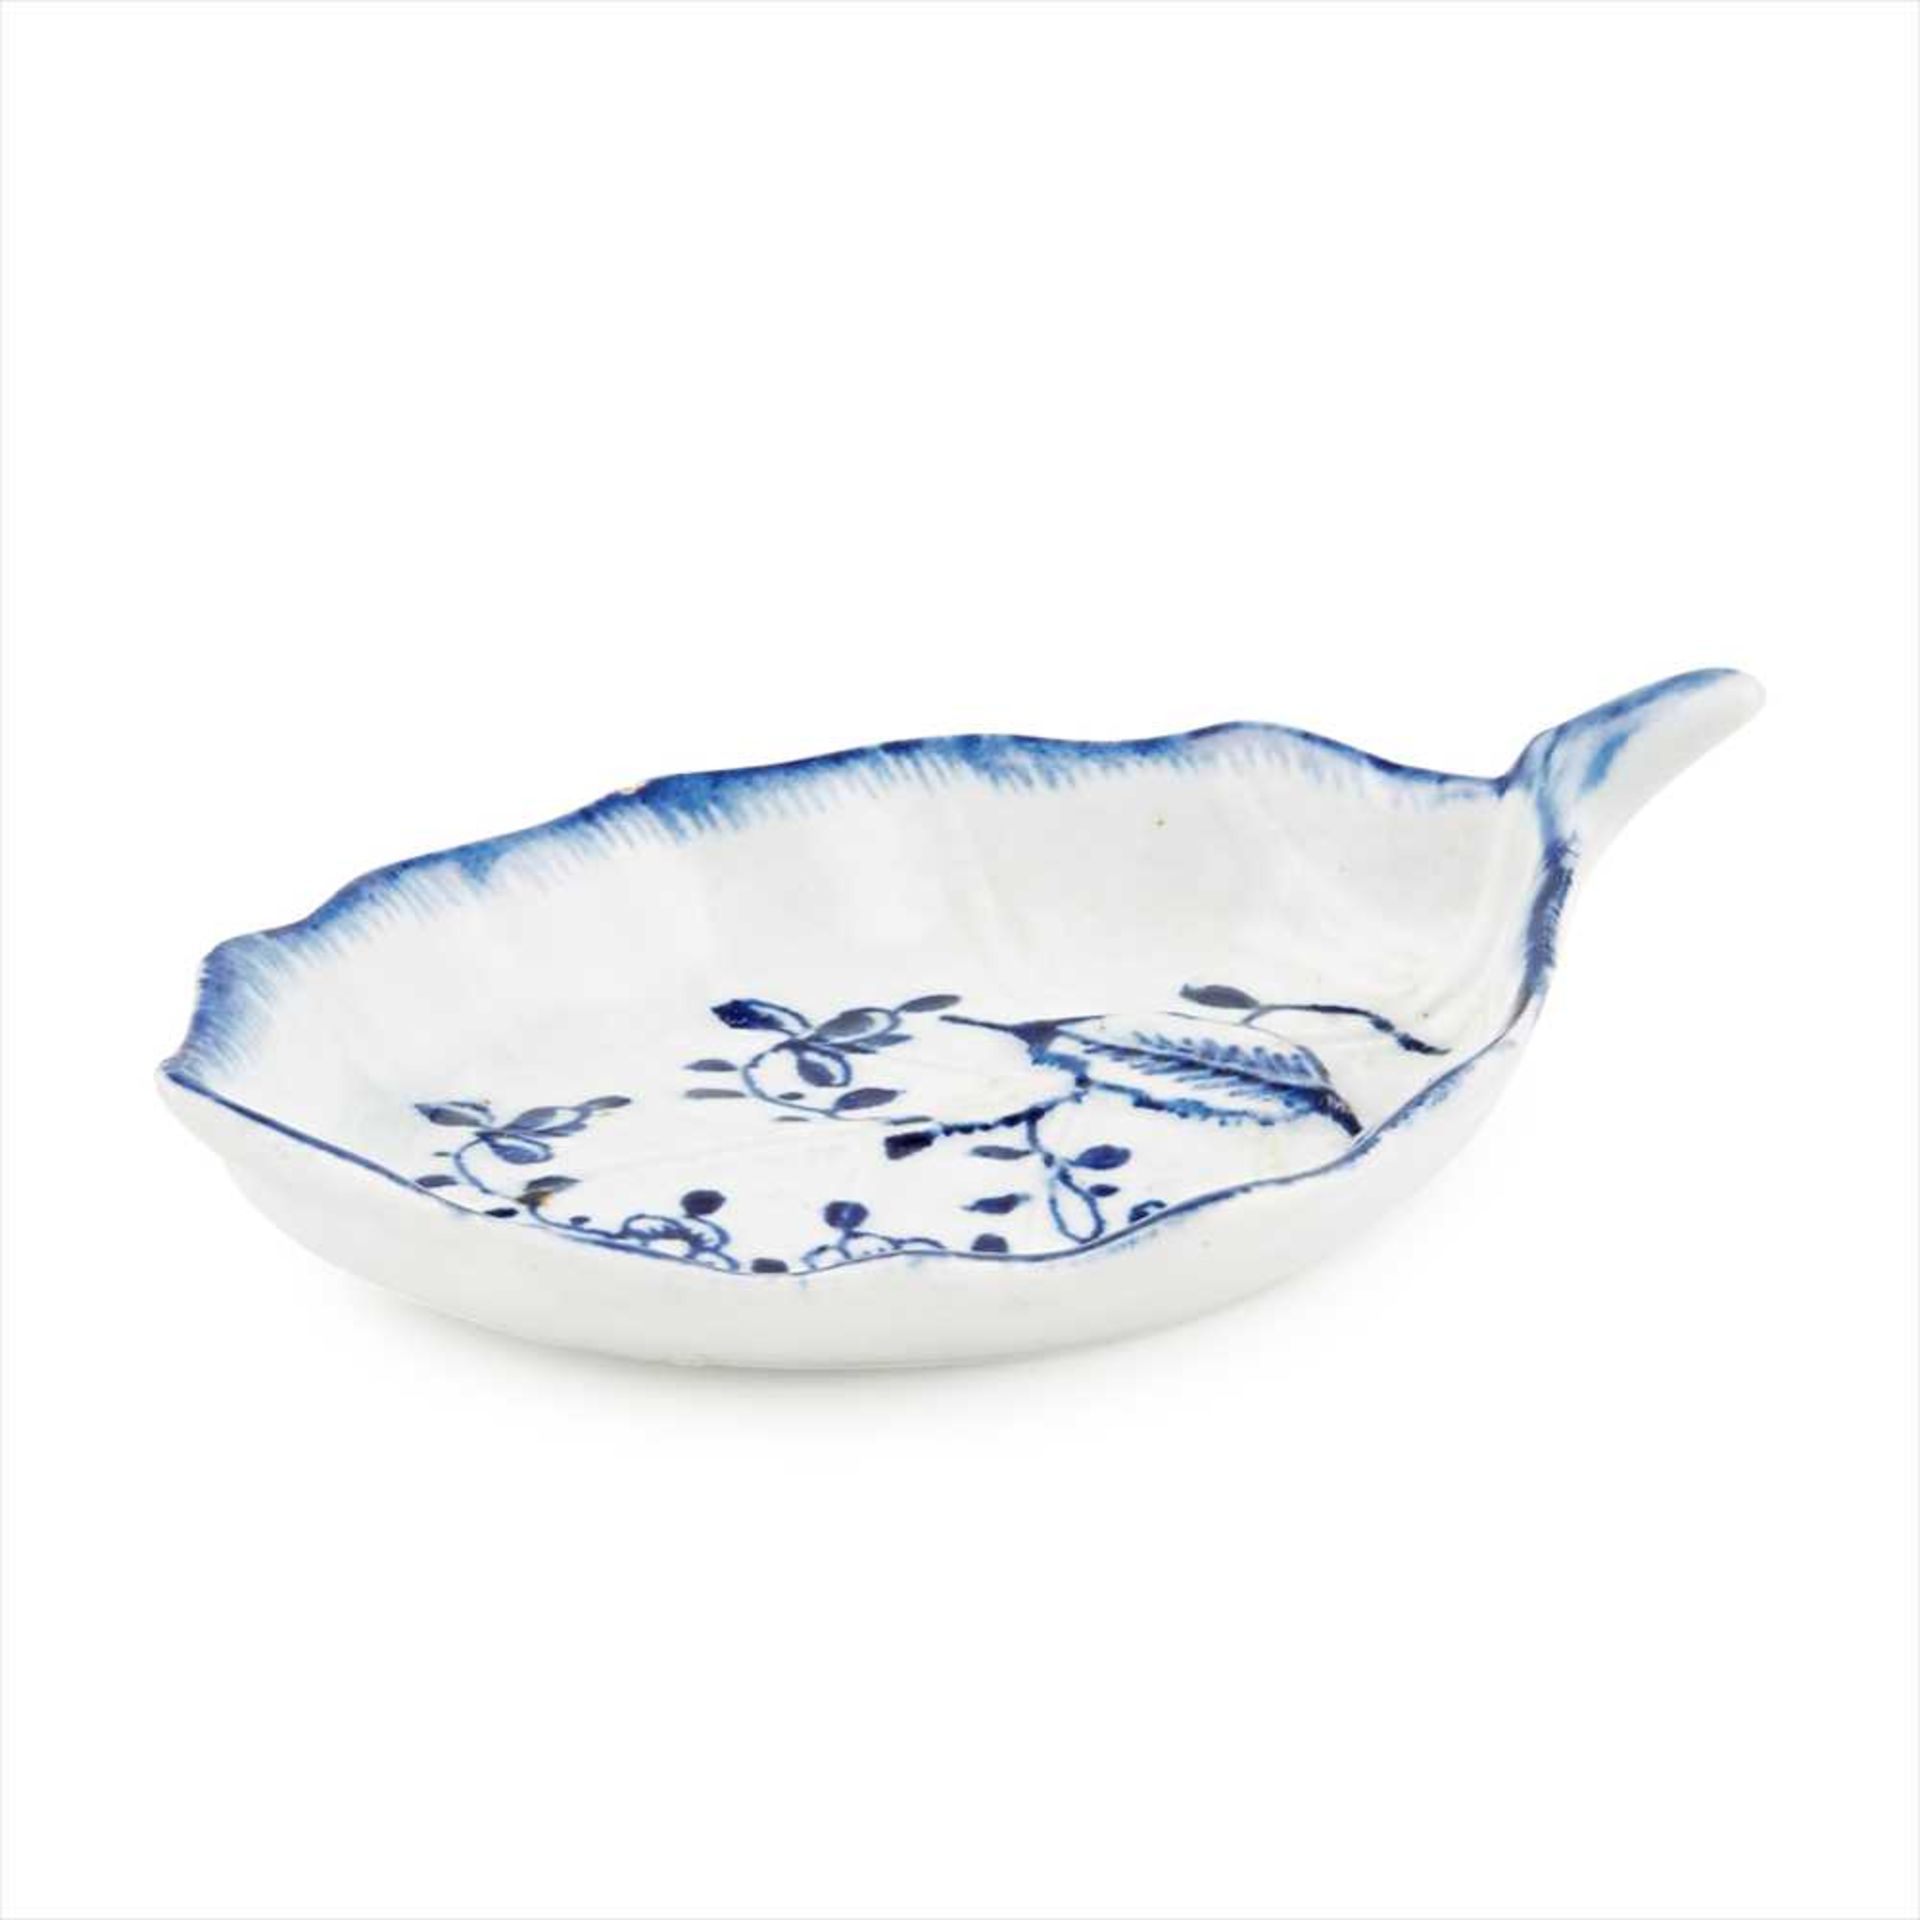 LOWESTOFT BLUE AND WHITE PORCELAIN PICKLE DISH CIRCA 1770 - Image 2 of 2